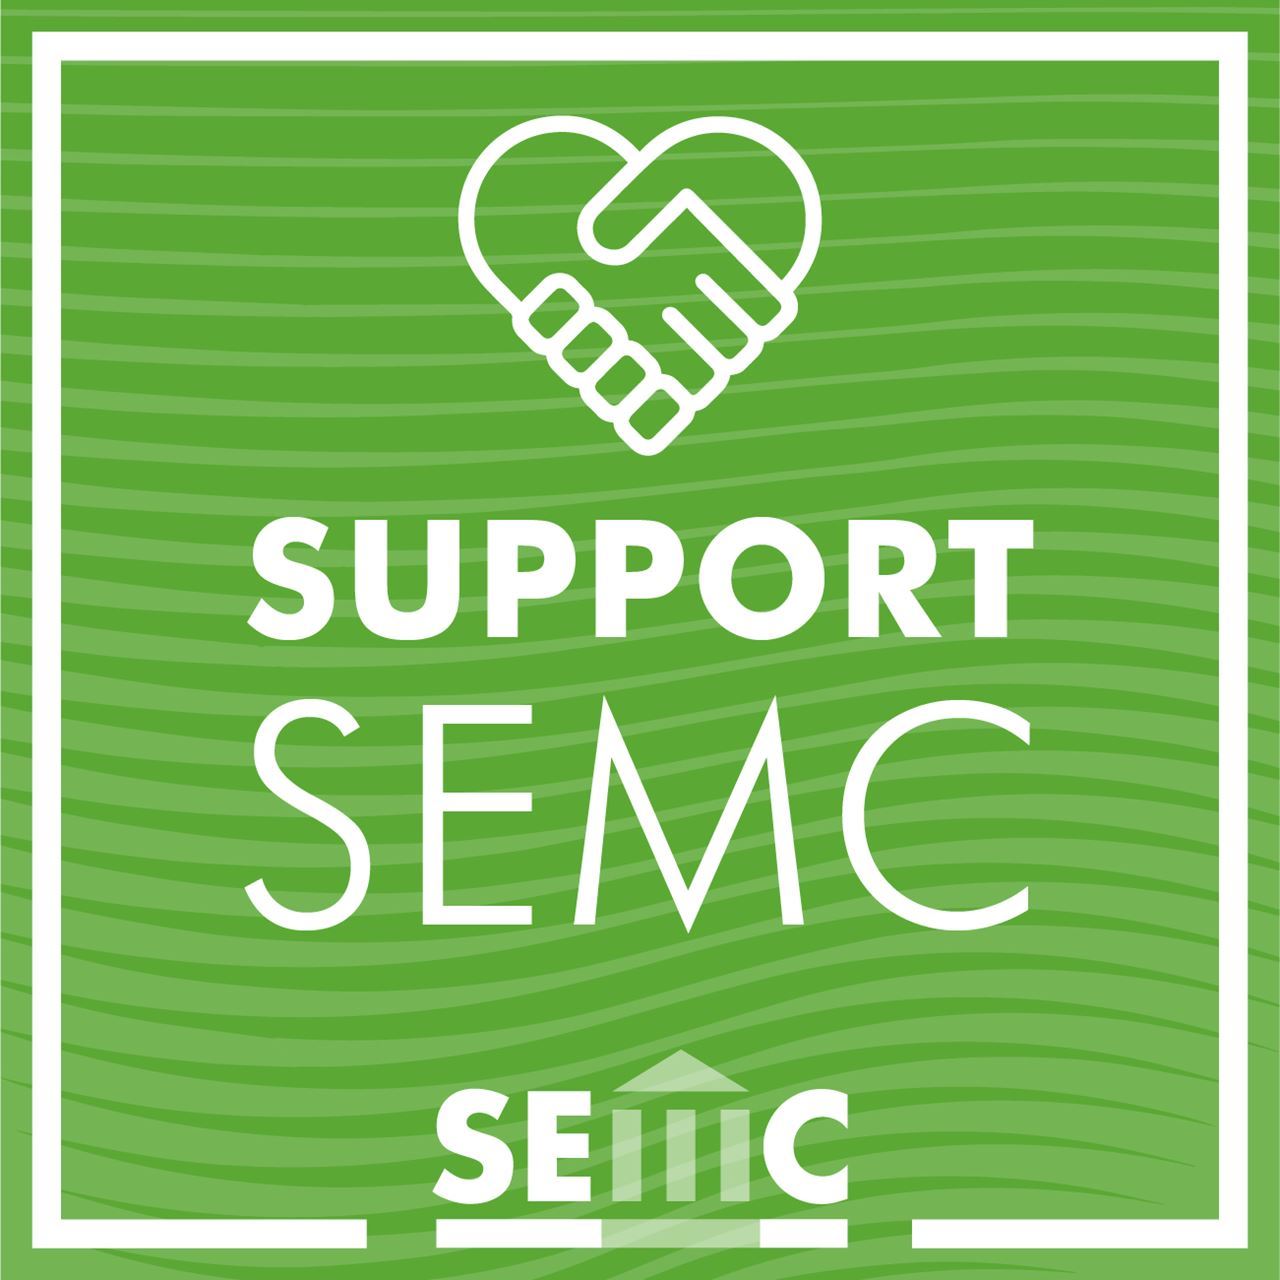 Green striped background, with a graphic of hands shaking in the shape of a heart. The words "Support SEMC" are centered with the graphic. The SEMC logo is also at the bottom.